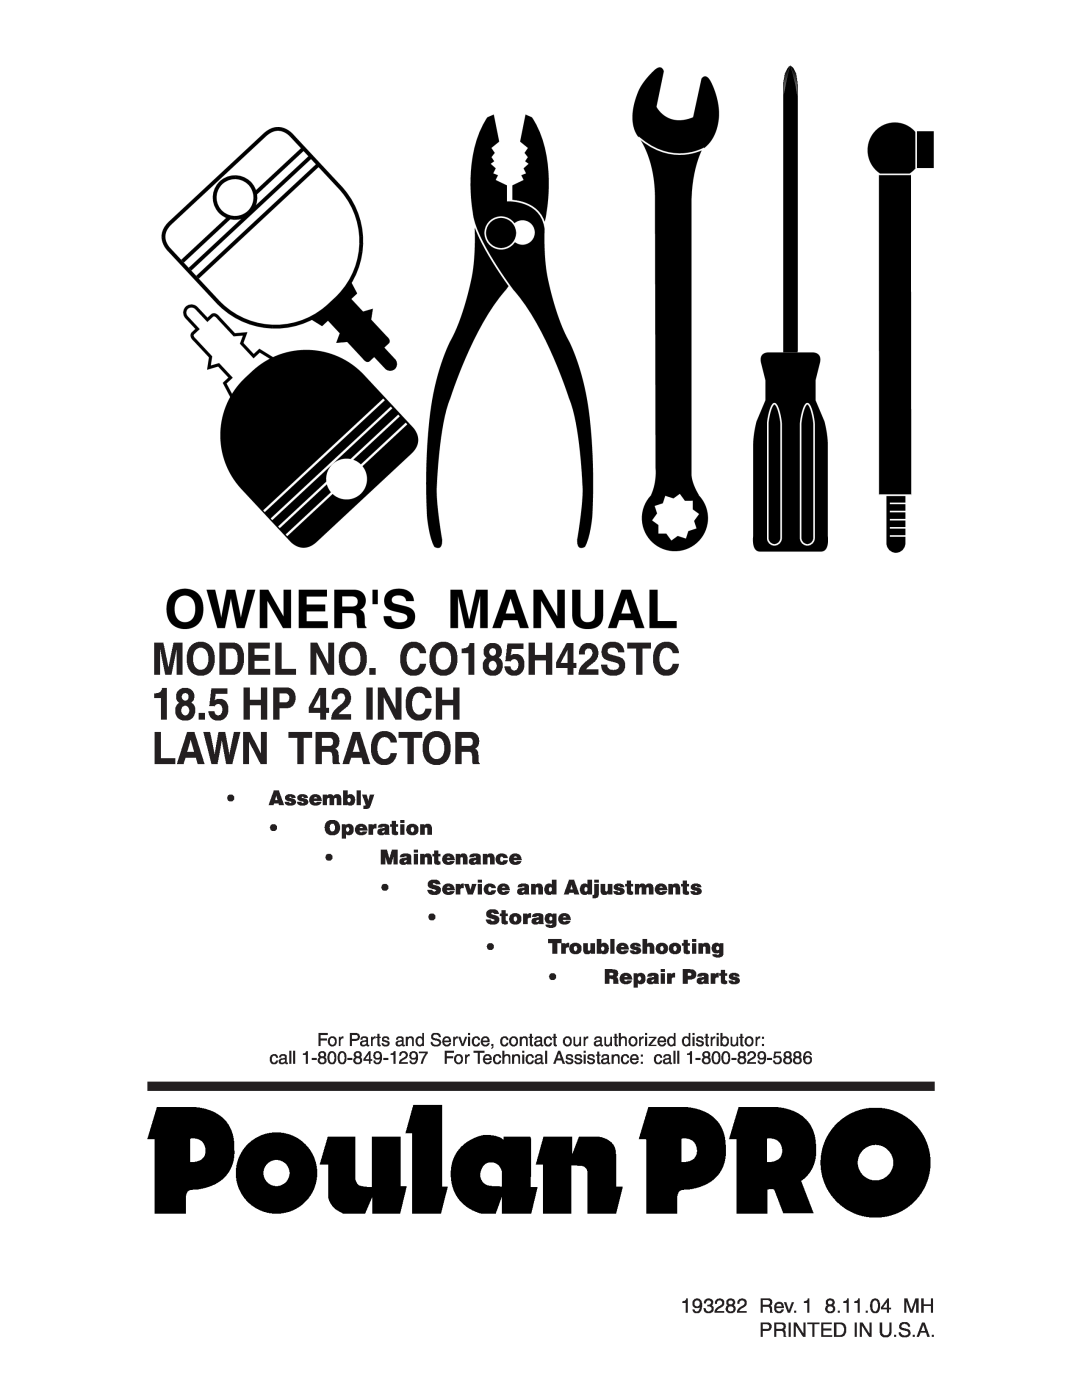 Poulan 193282 manual MODEL NO. CO185H42STC, 18.5HP 42 INCH LAWN TRACTOR, •Assembly • Operation • Maintenance 